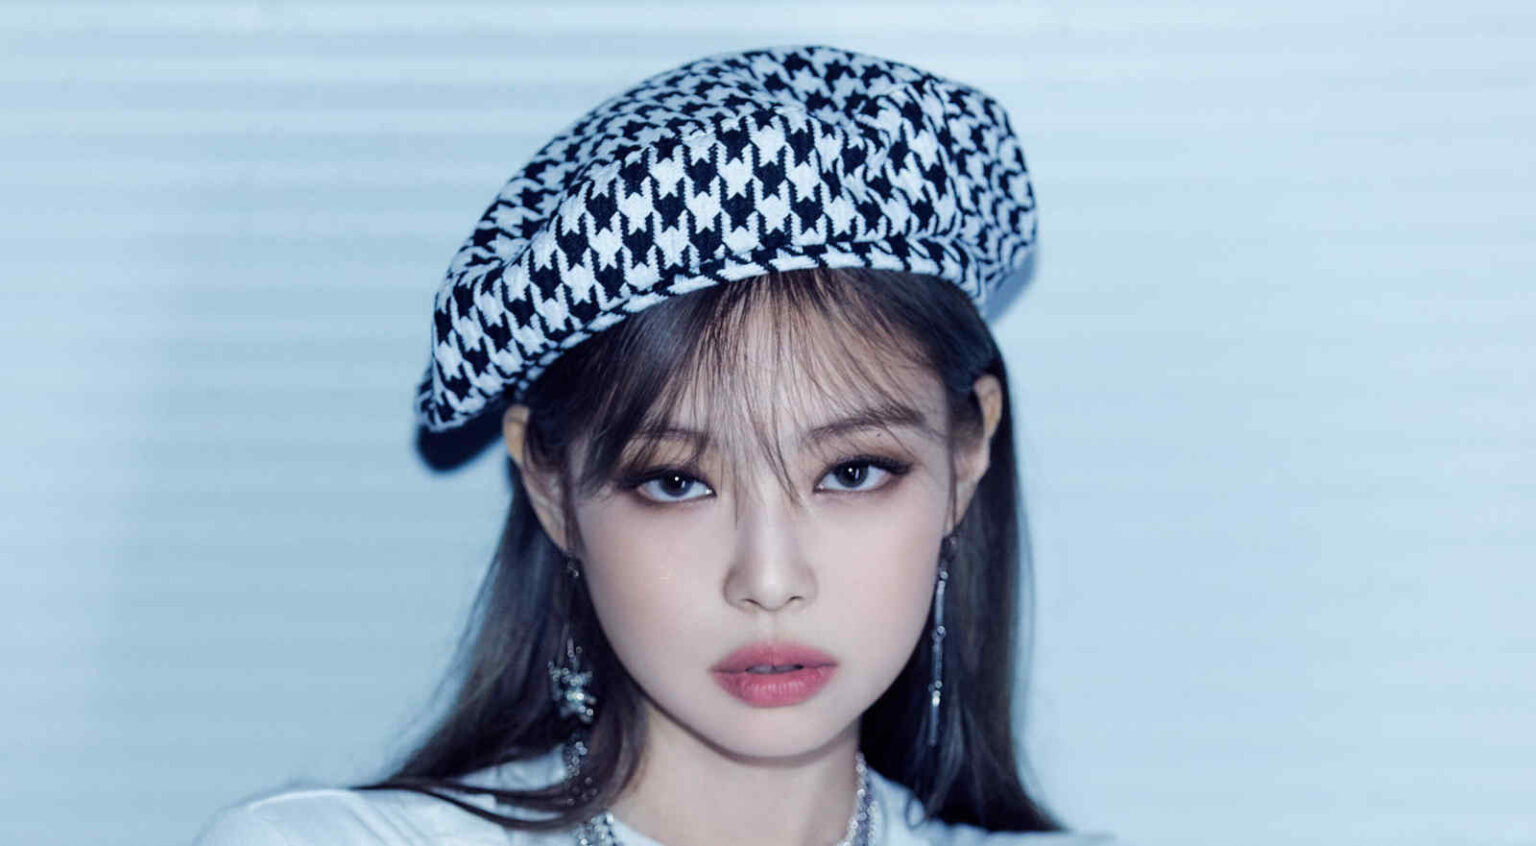 'Born Pink': Discover if Jennie from Blackpink is 